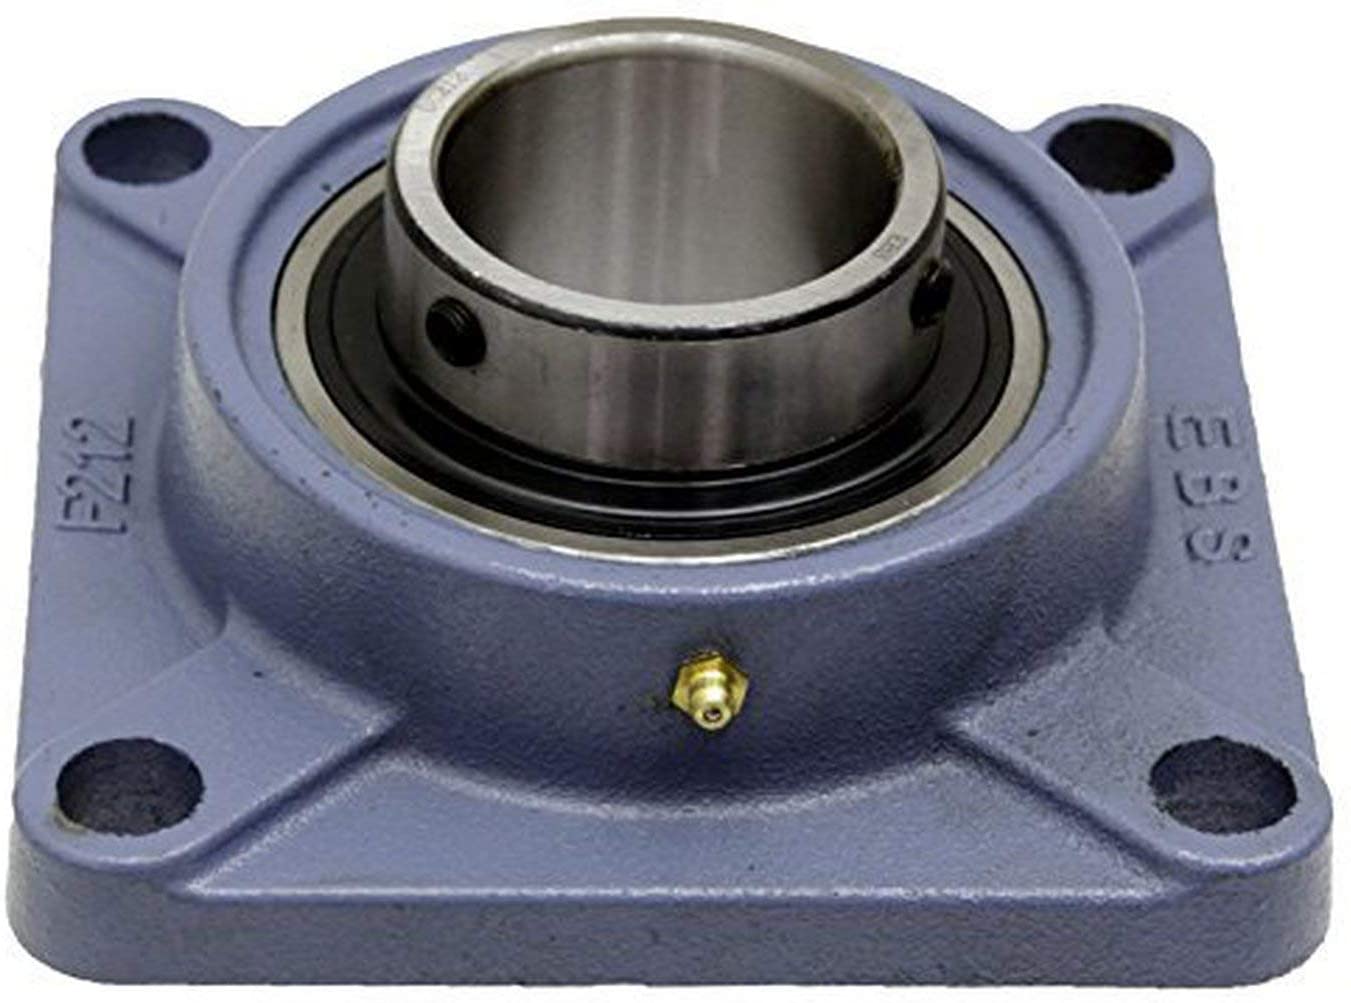 UCF202-10   GENERIC Normal duty 4 bolt cast iron flange self-lube housed unit - Imperial Thumbnail